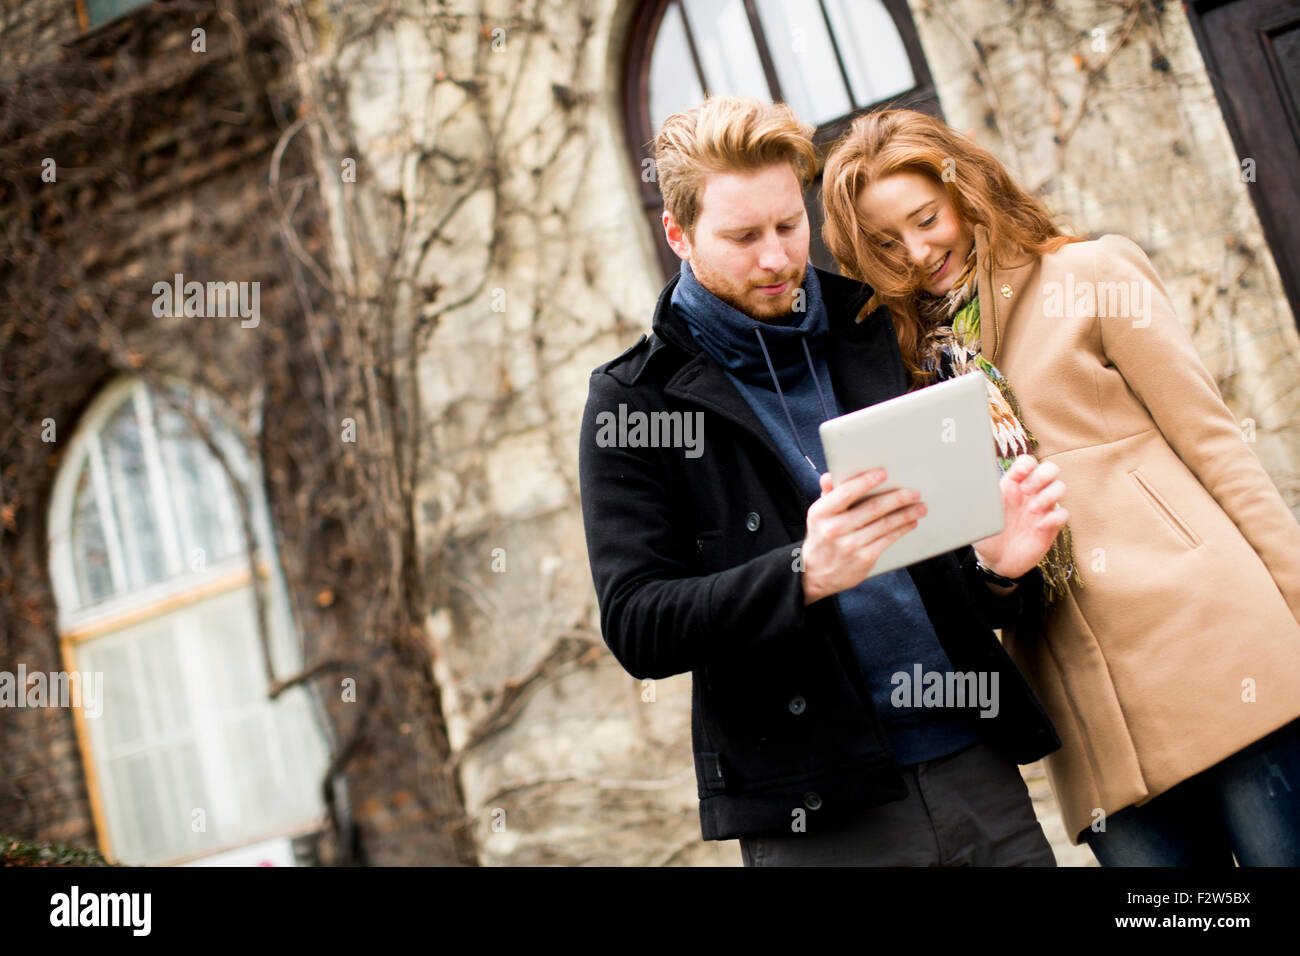 Young couple with tablet Stock Photo